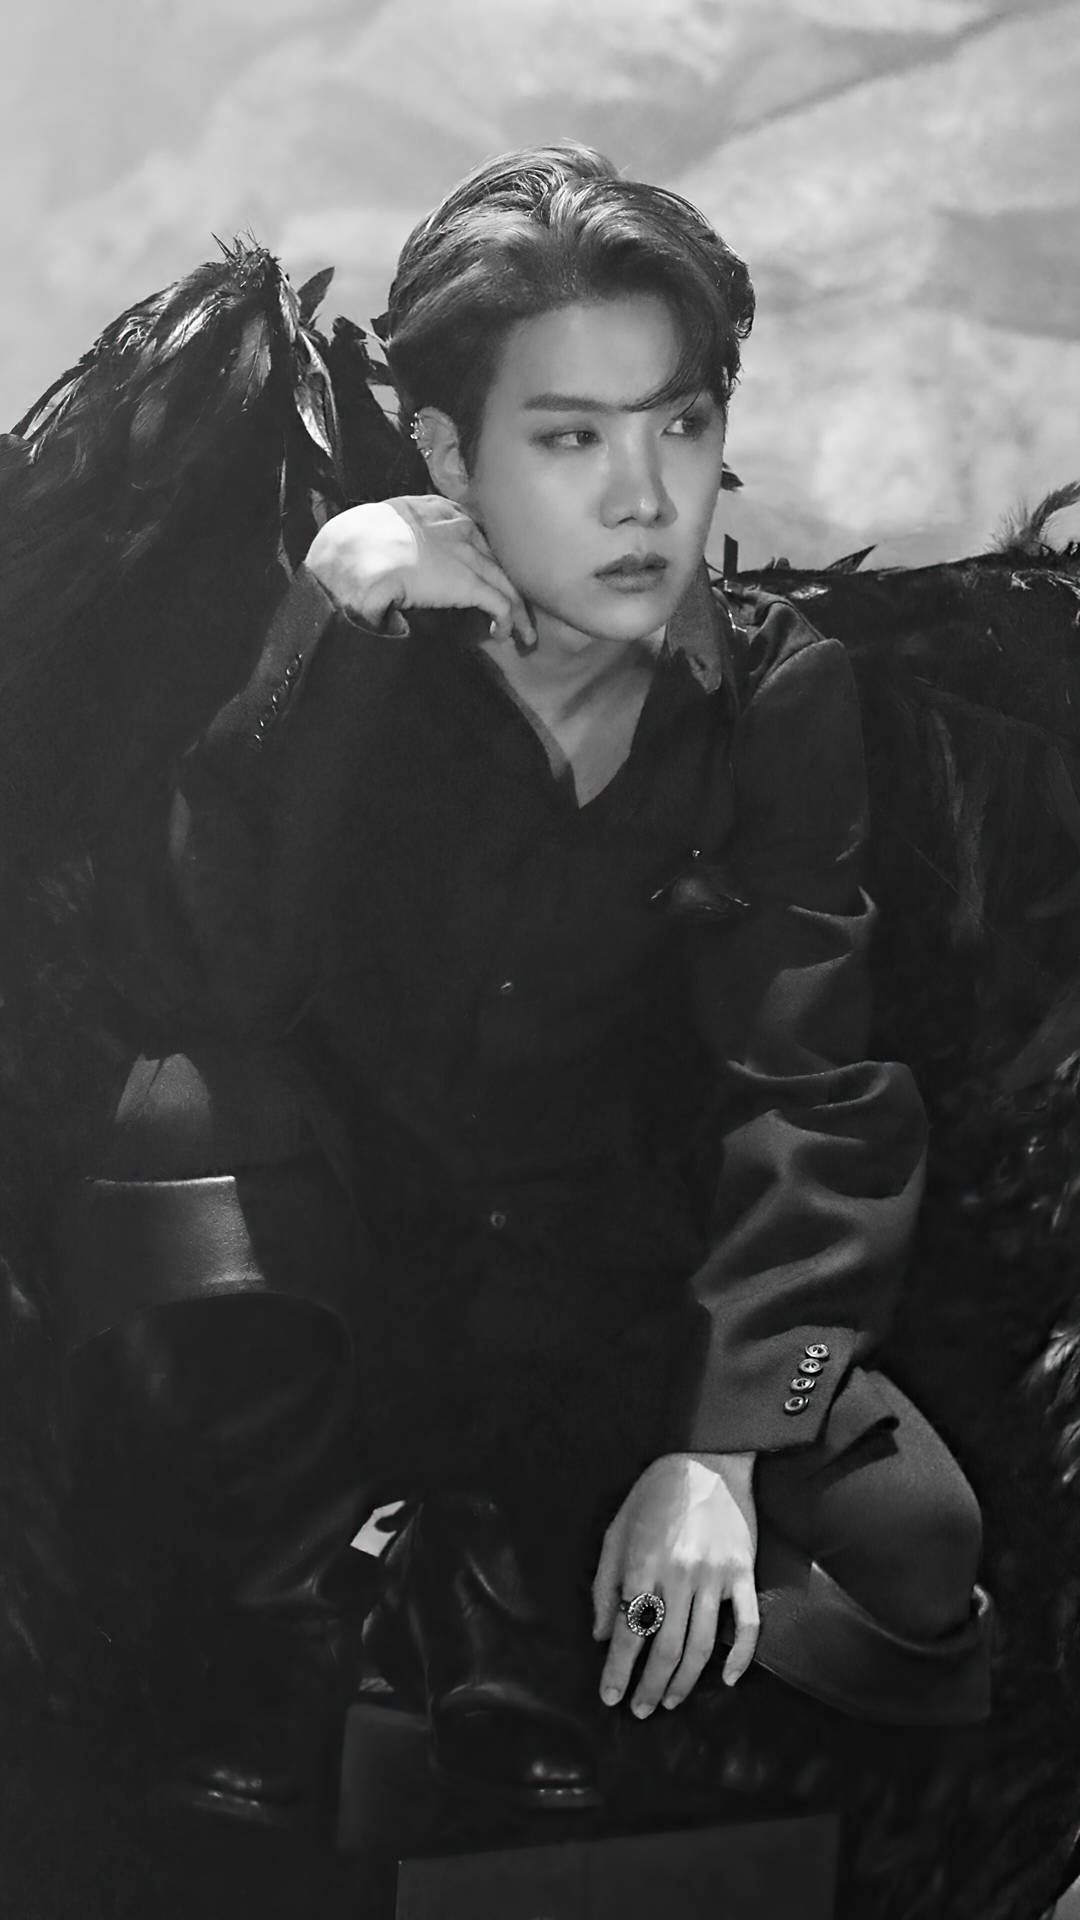 J-hope In Black And White Background